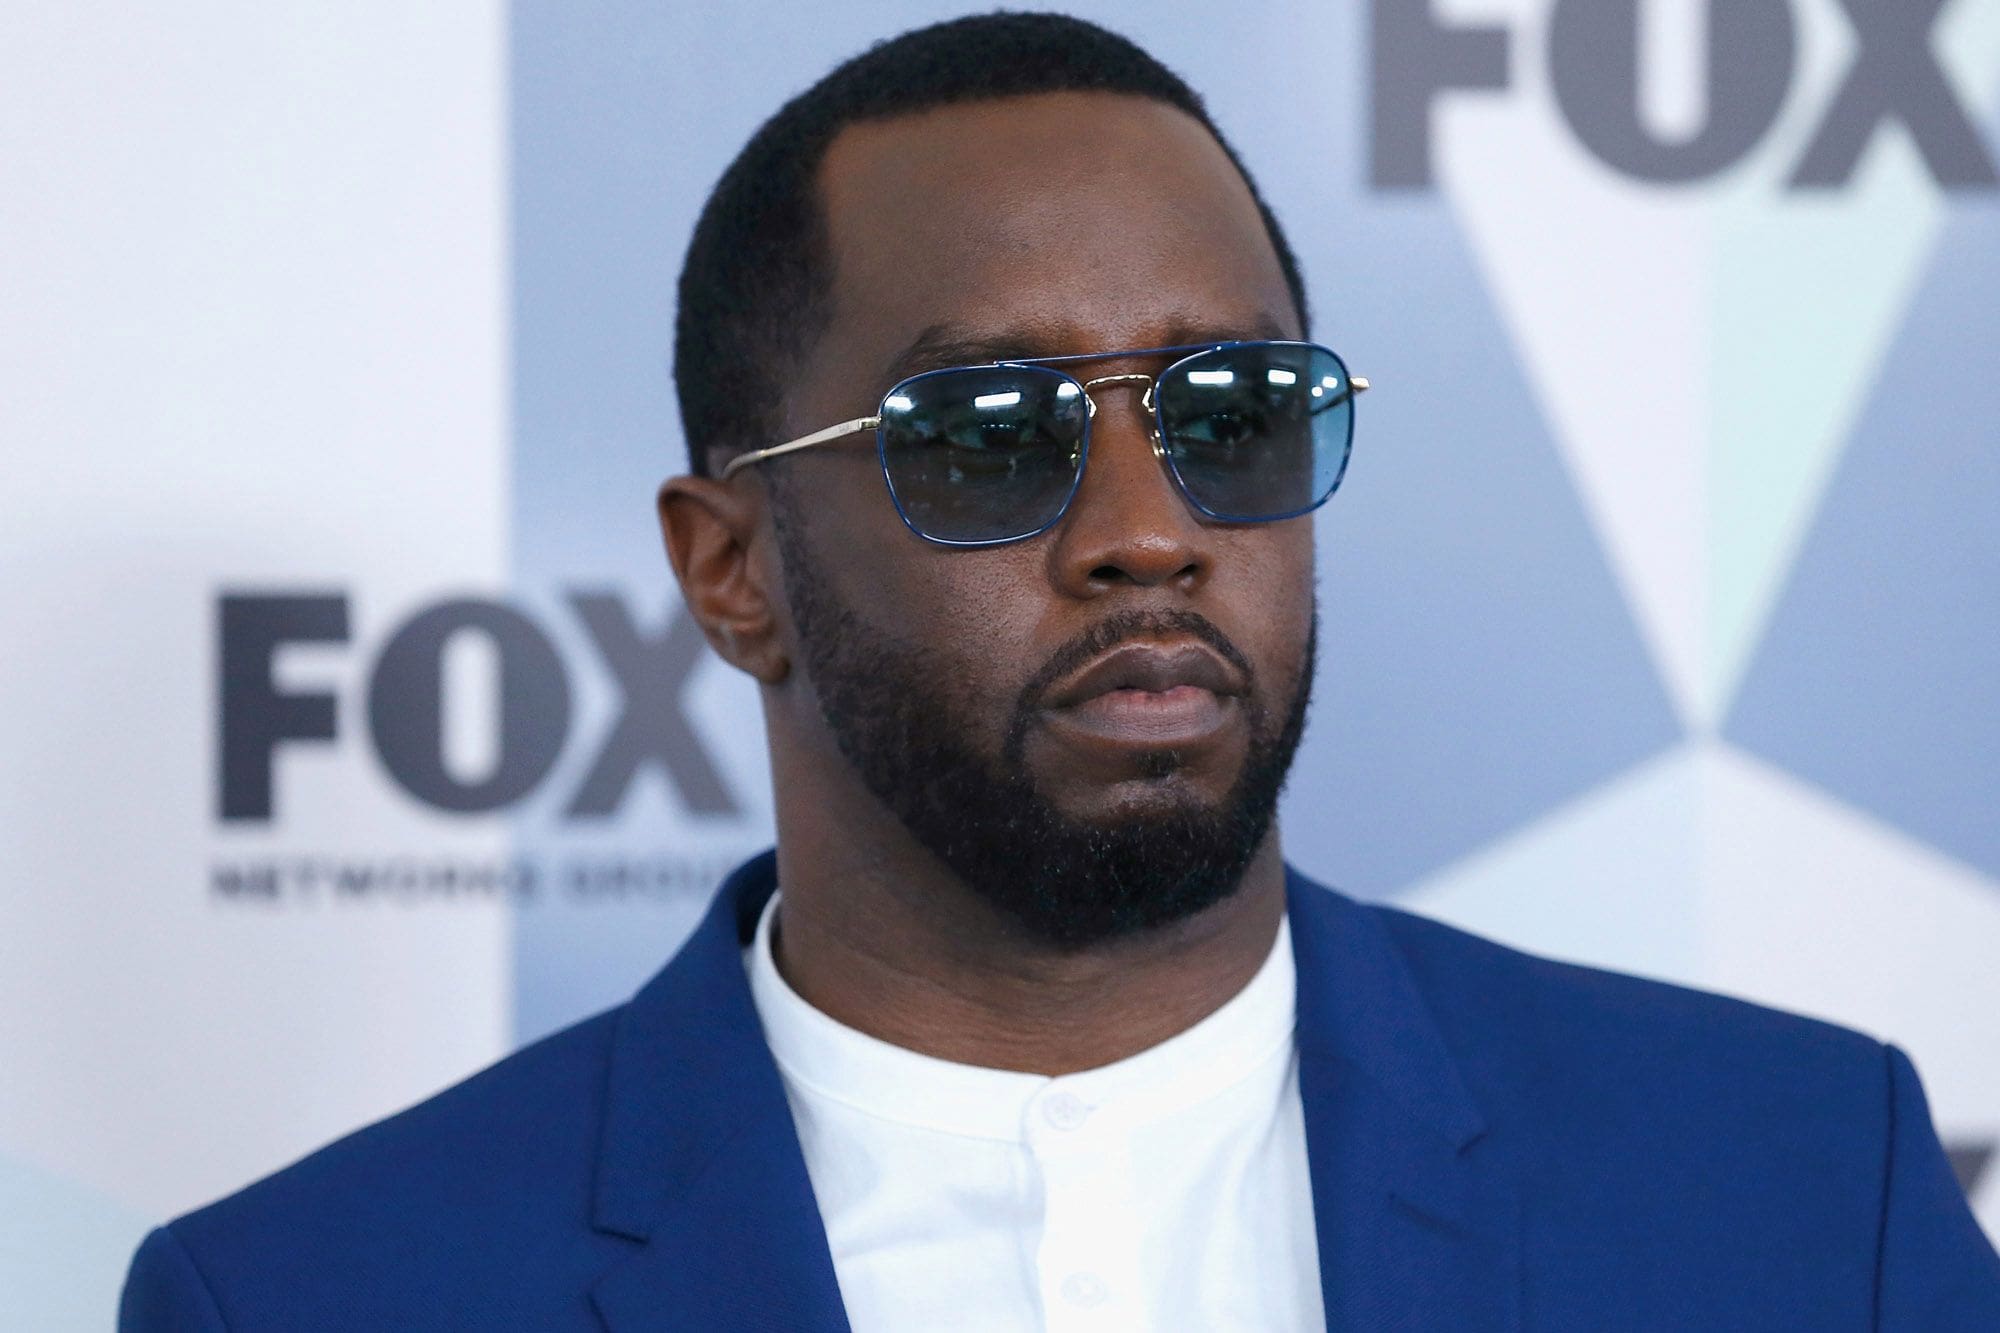 Diddy Talks About Love And Hate In This IG Message